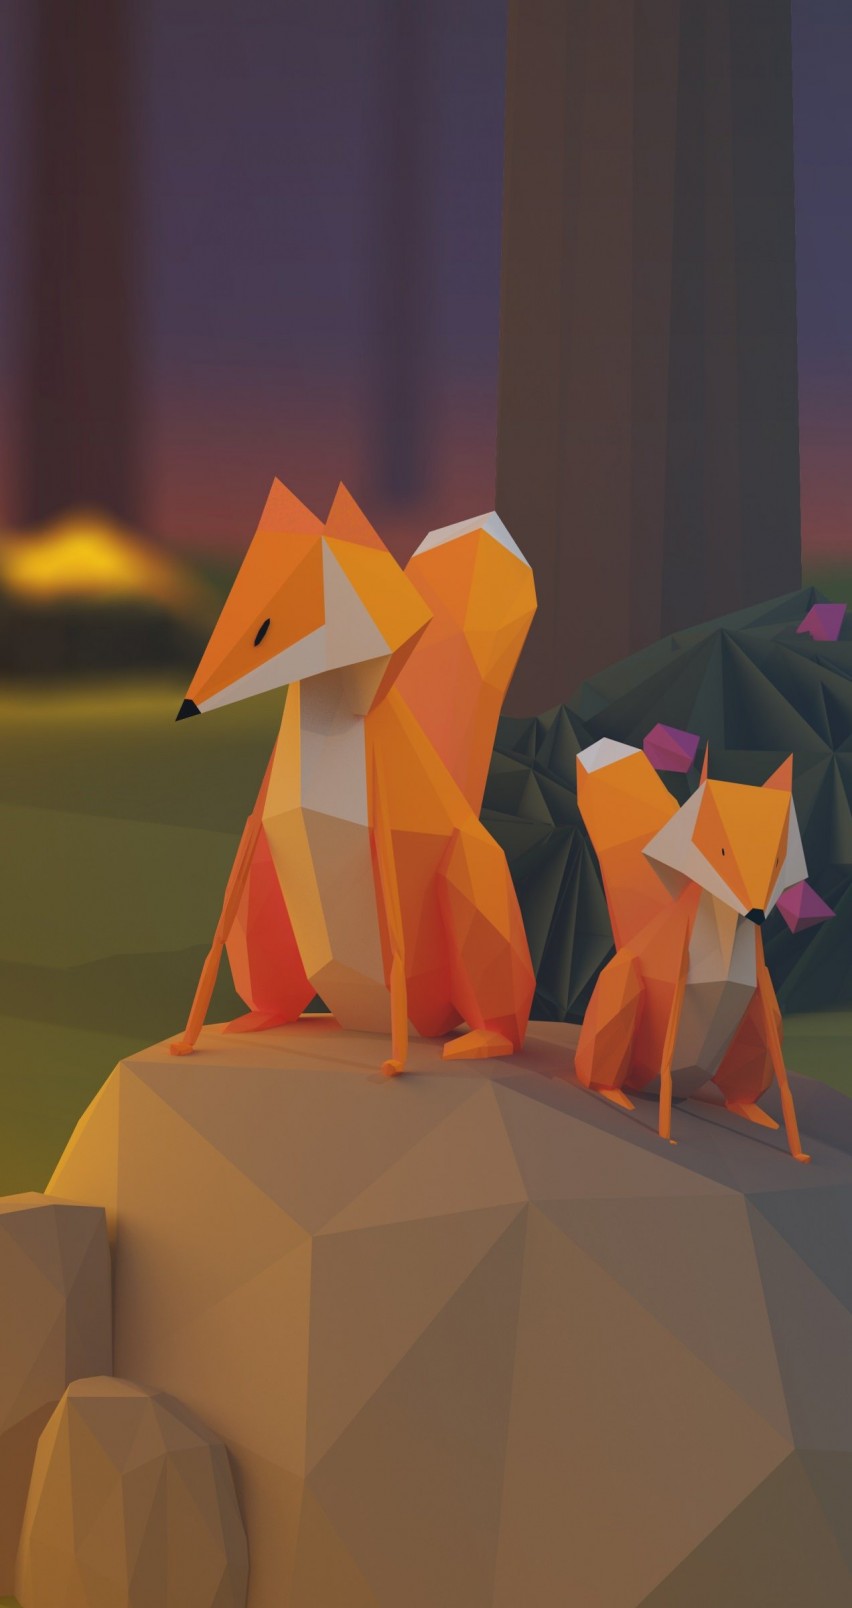 Low Poly Foxes Wallpaper for Apple iPhone 6 / 6s